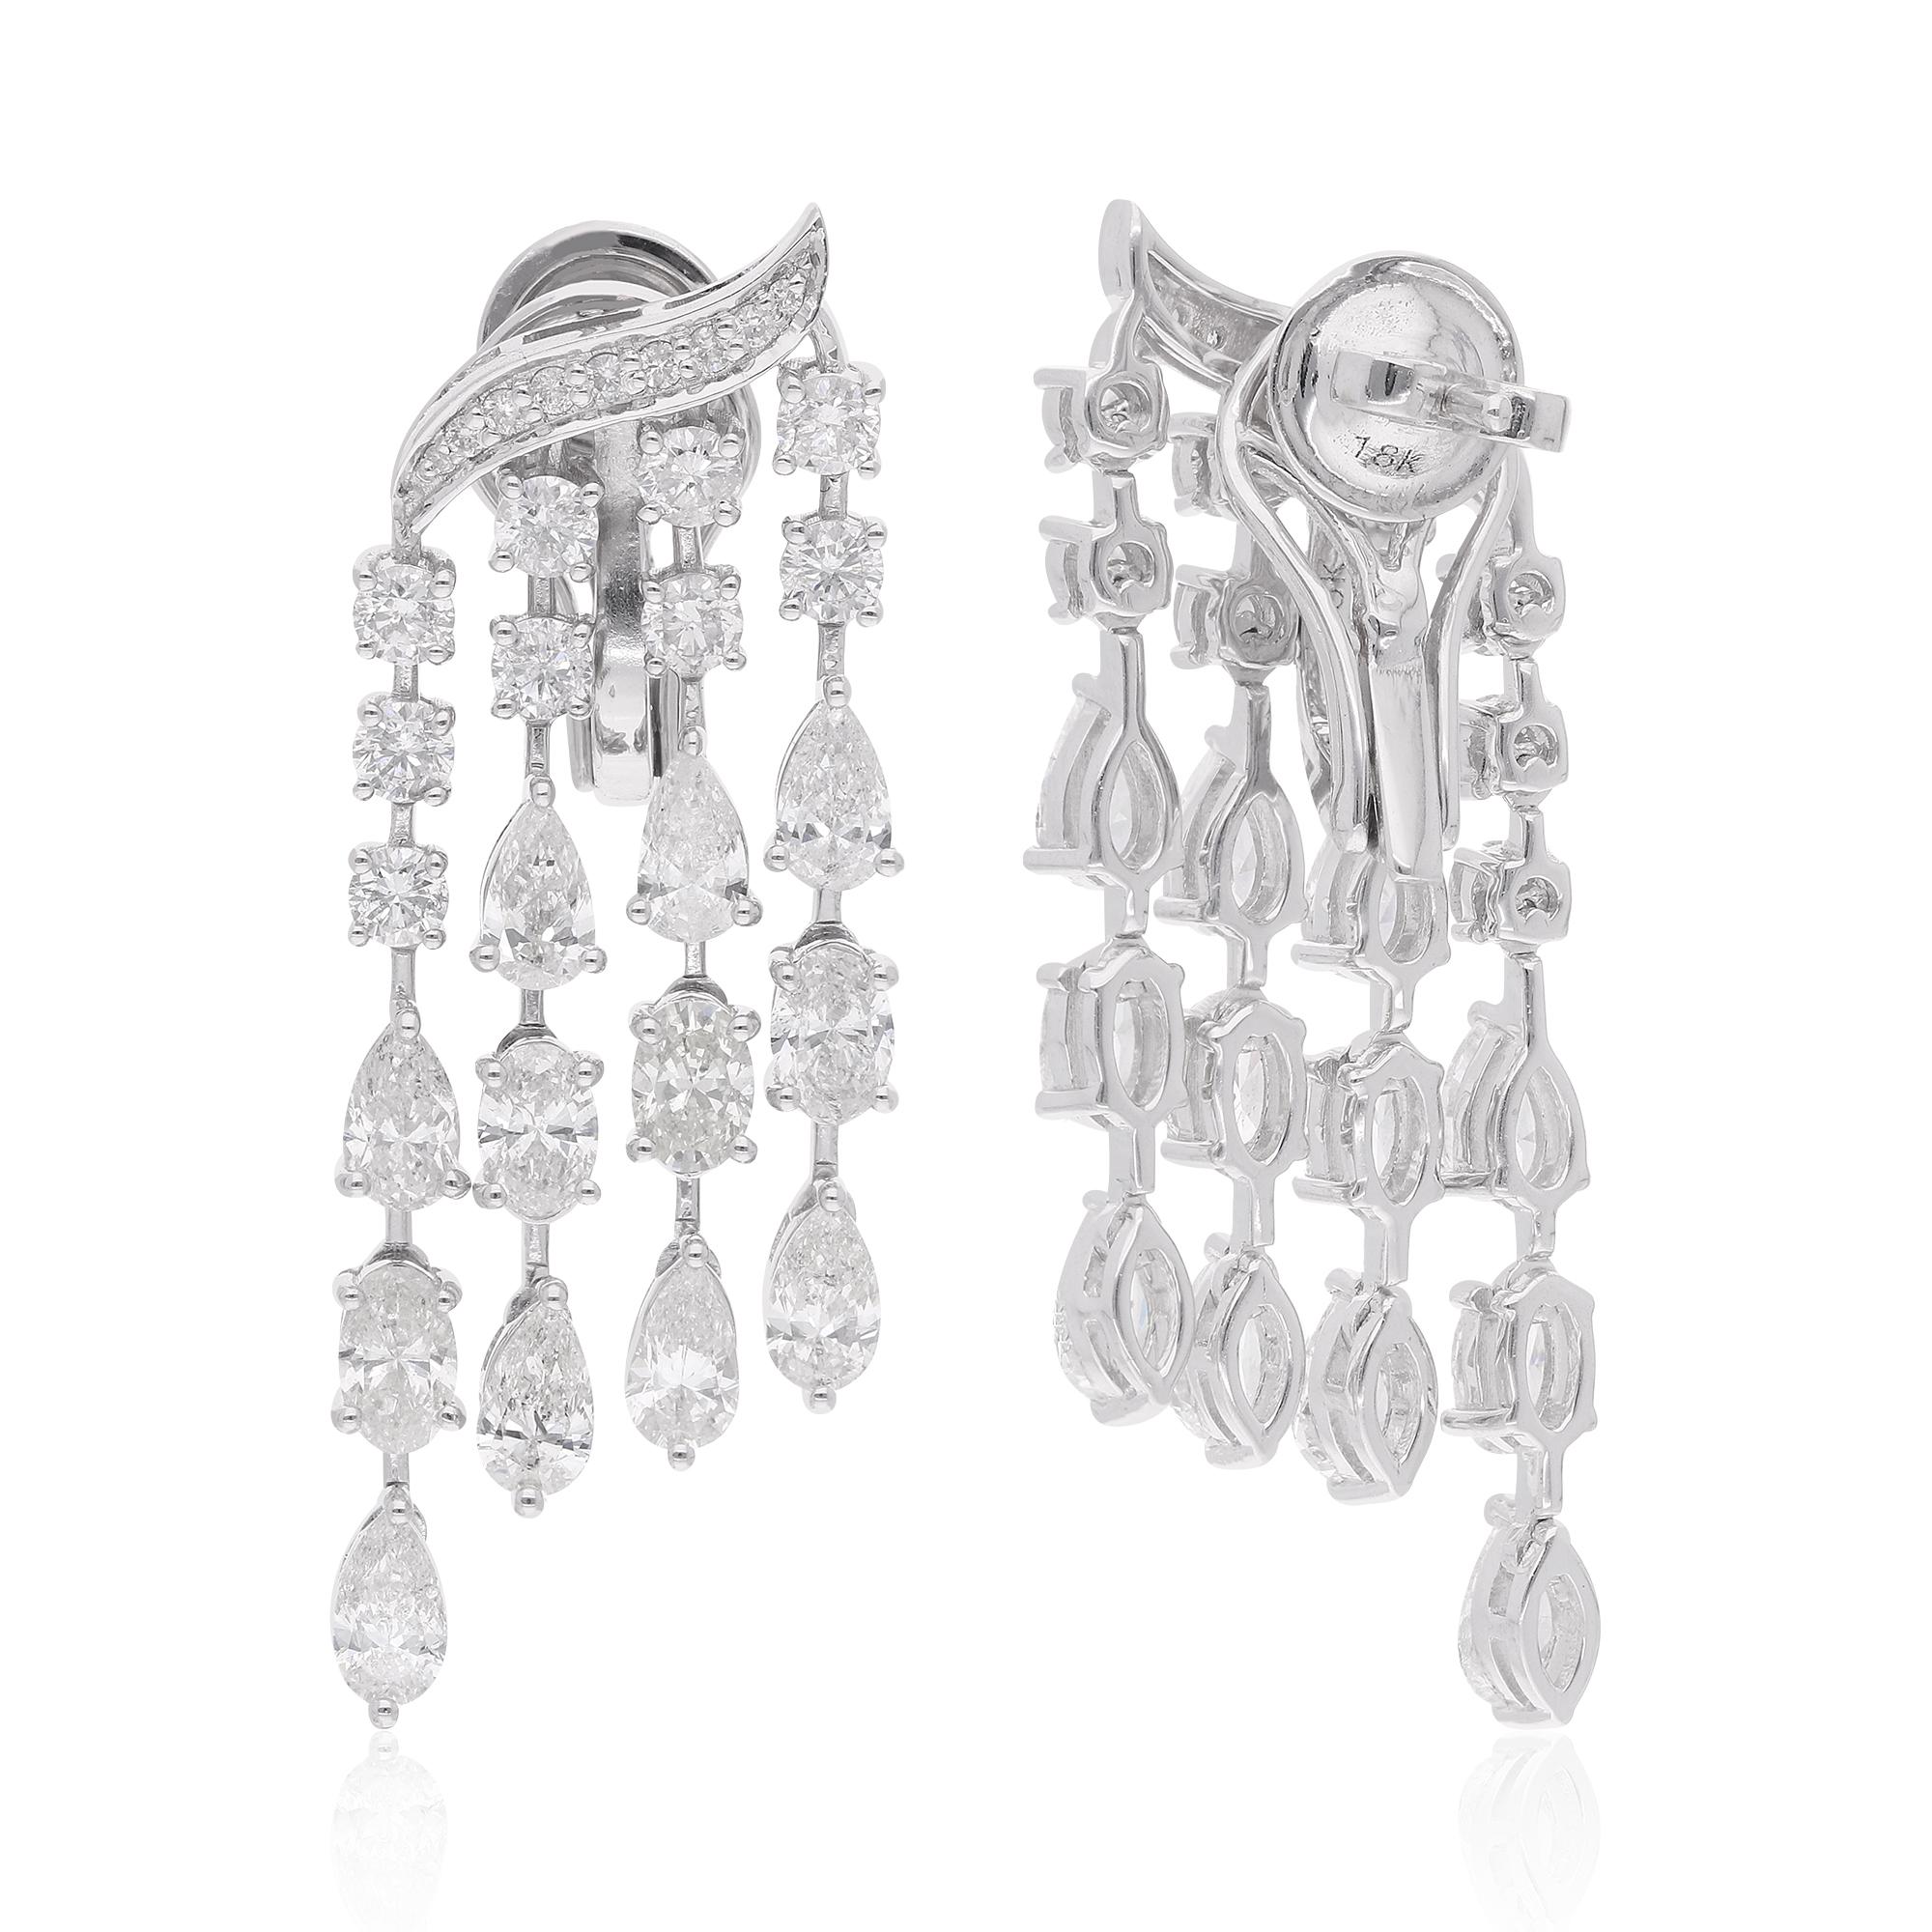 Chandelier earrings featuring pear, oval, and round diamonds in 18 karat white gold are a stunning and glamorous pair of fine jewelry. Each earring showcases a combination of pear-shaped, oval-shaped, and round diamonds.

Item Code :-